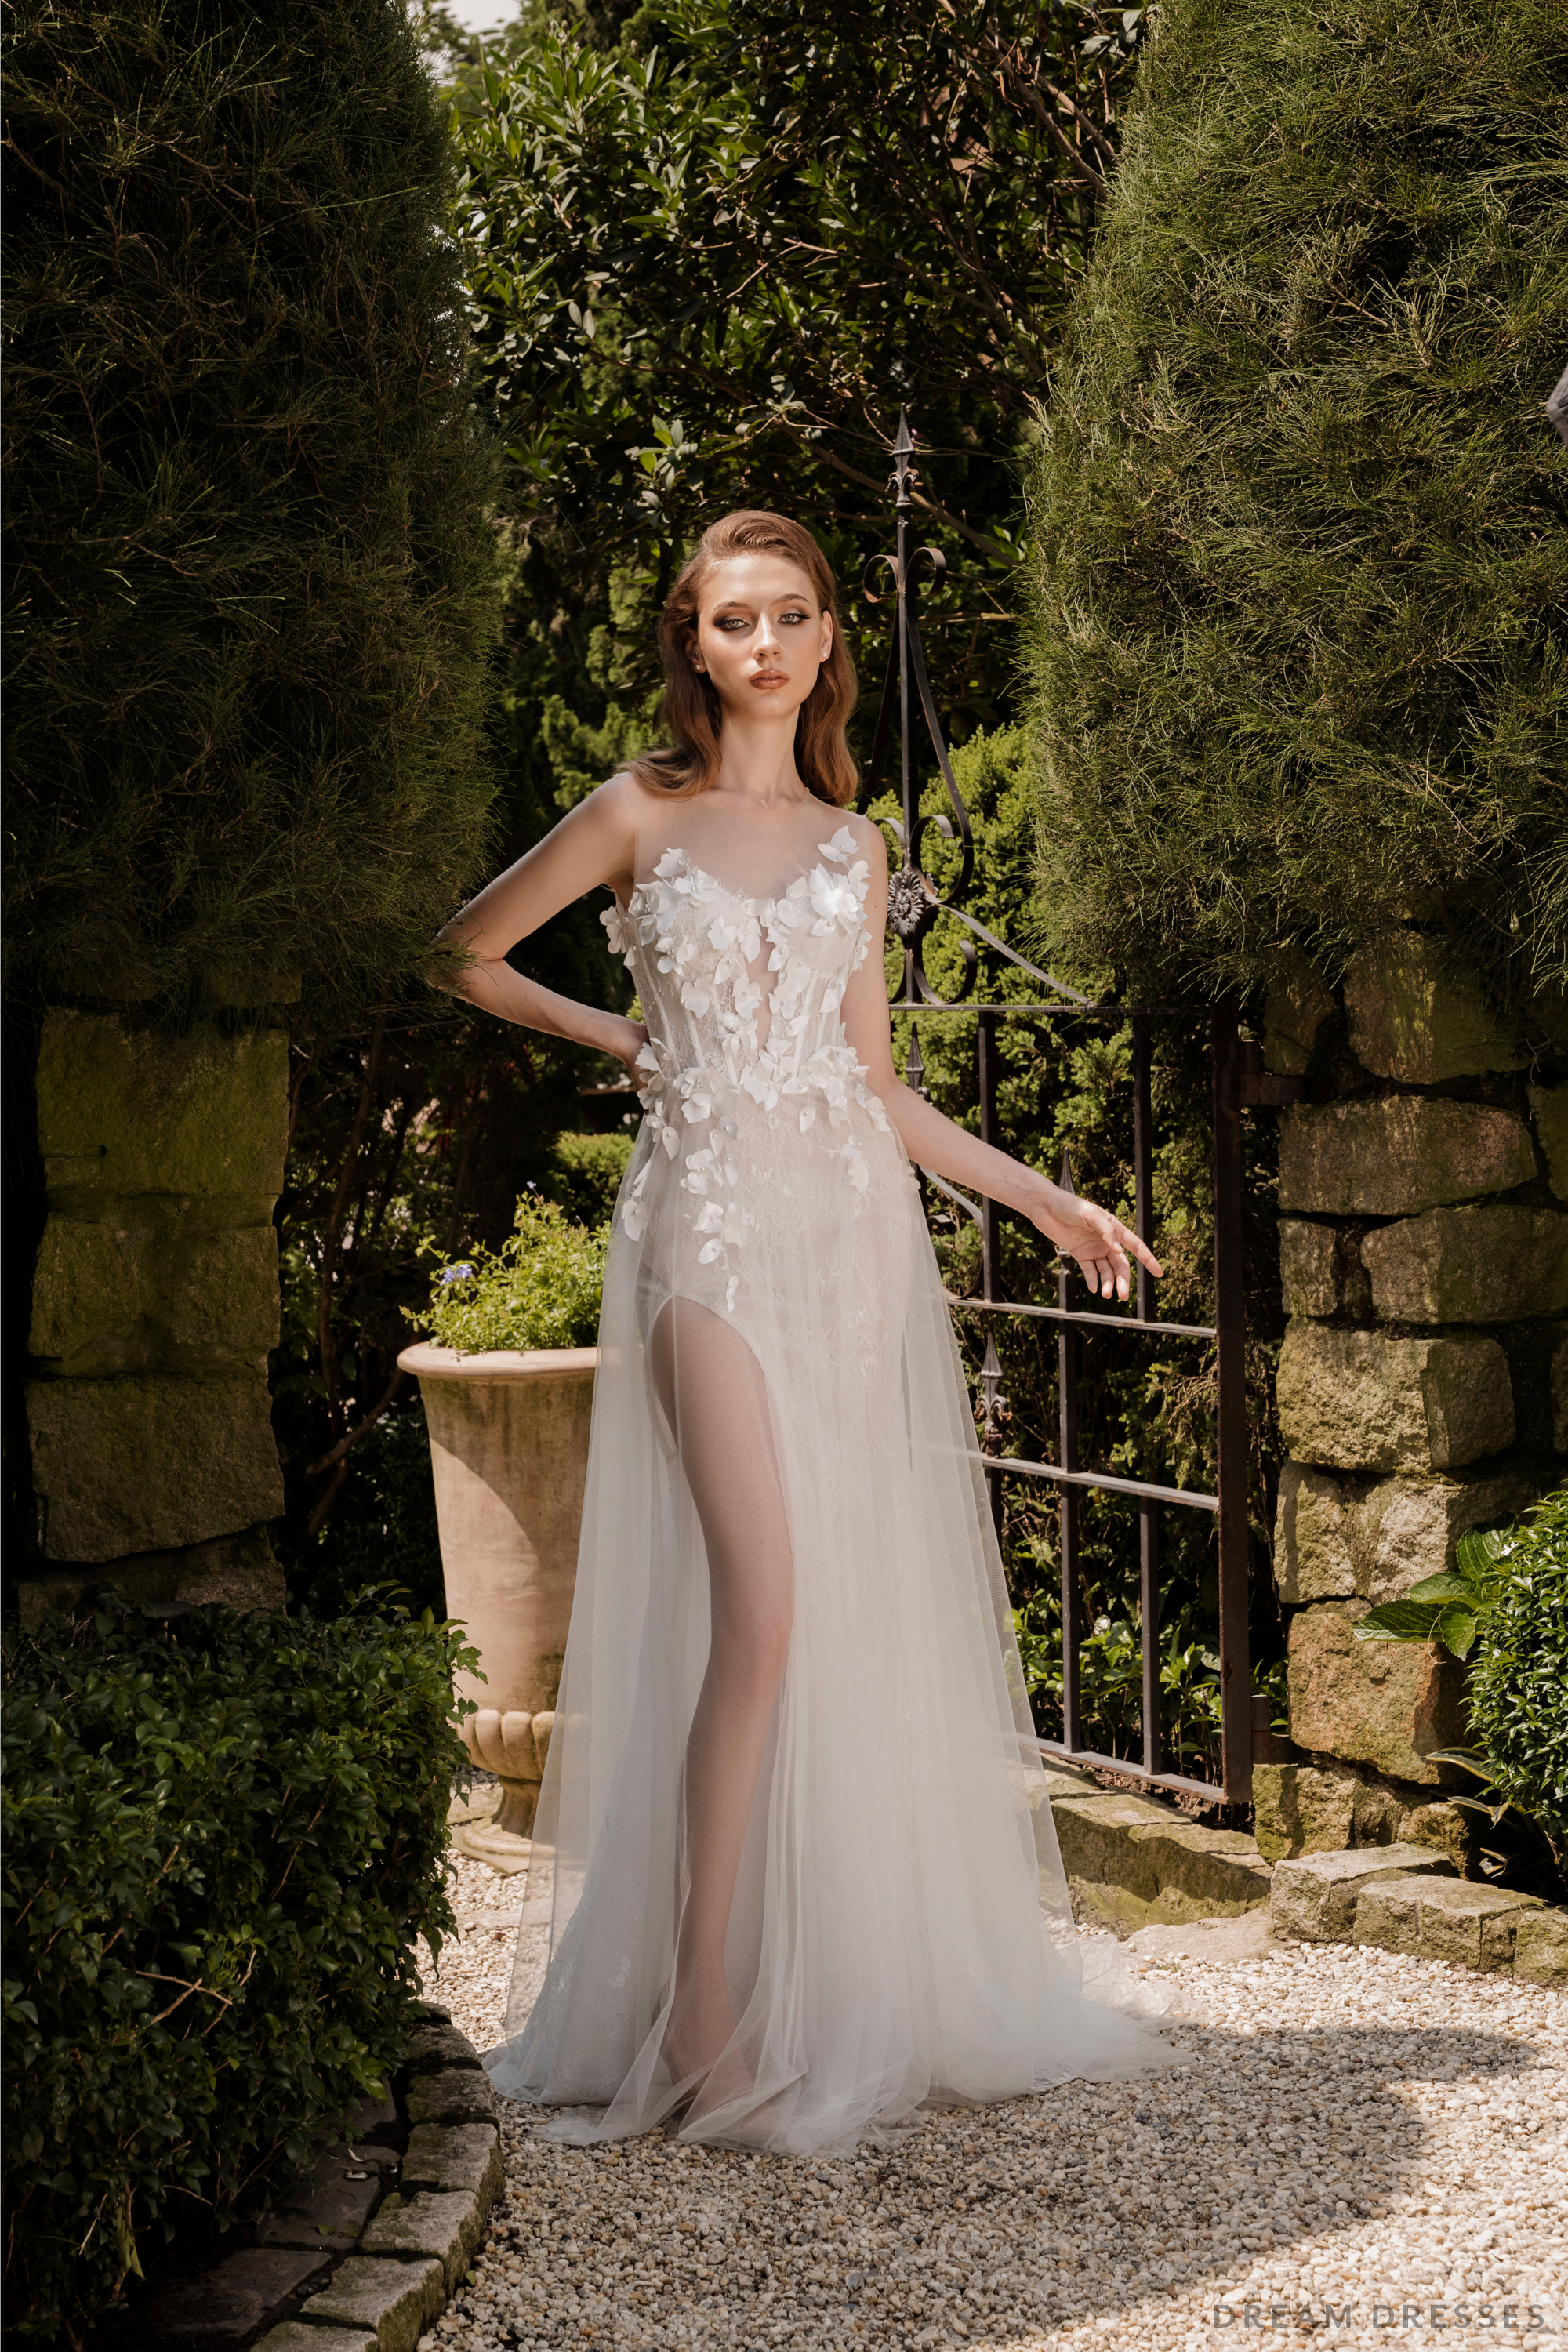 3D Lace Wedding Dress with High Slit (#JUSTYNE)